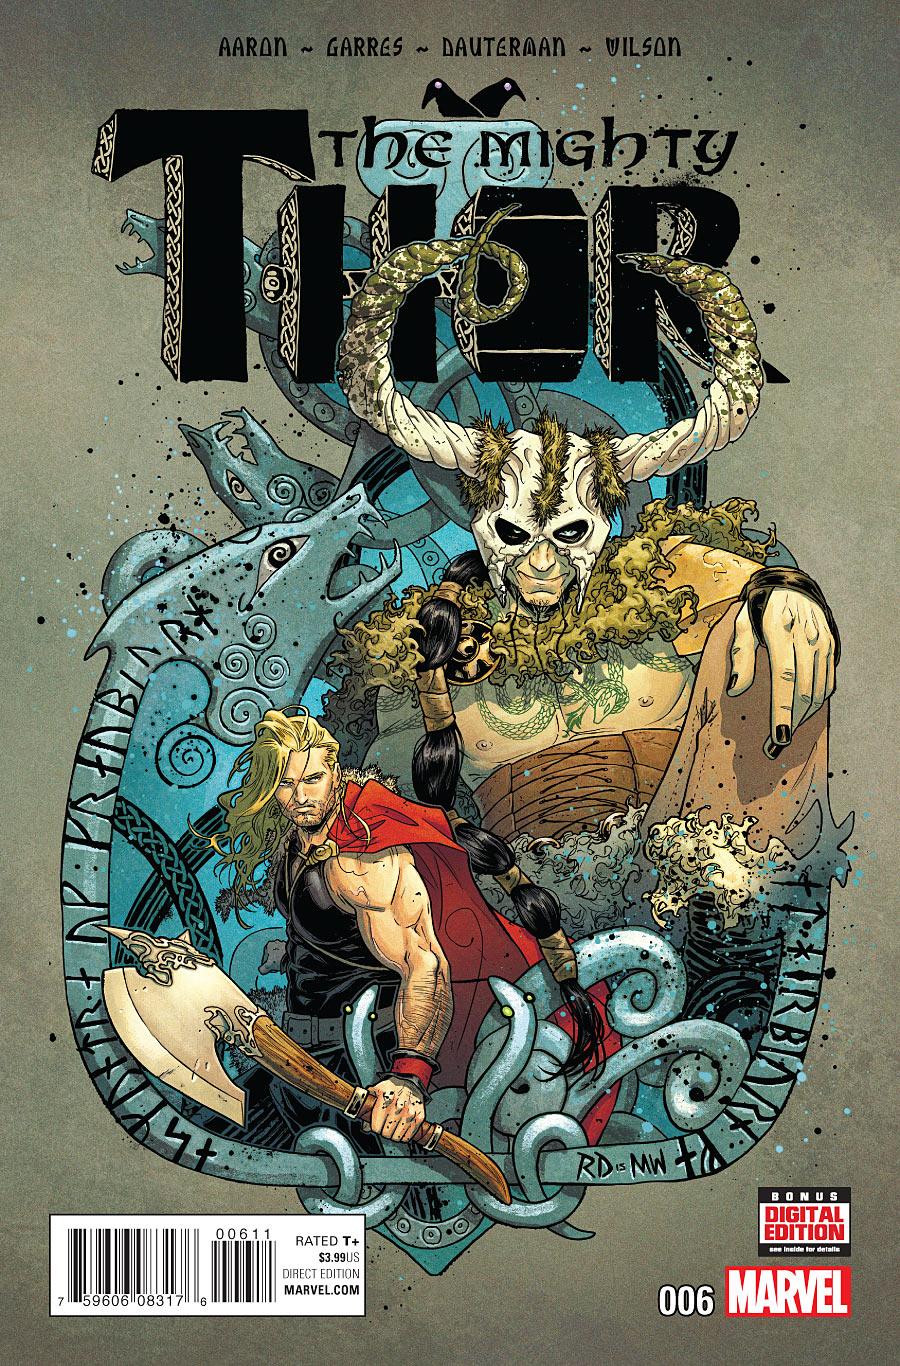 The Mighty Thor Vol. 2 #6